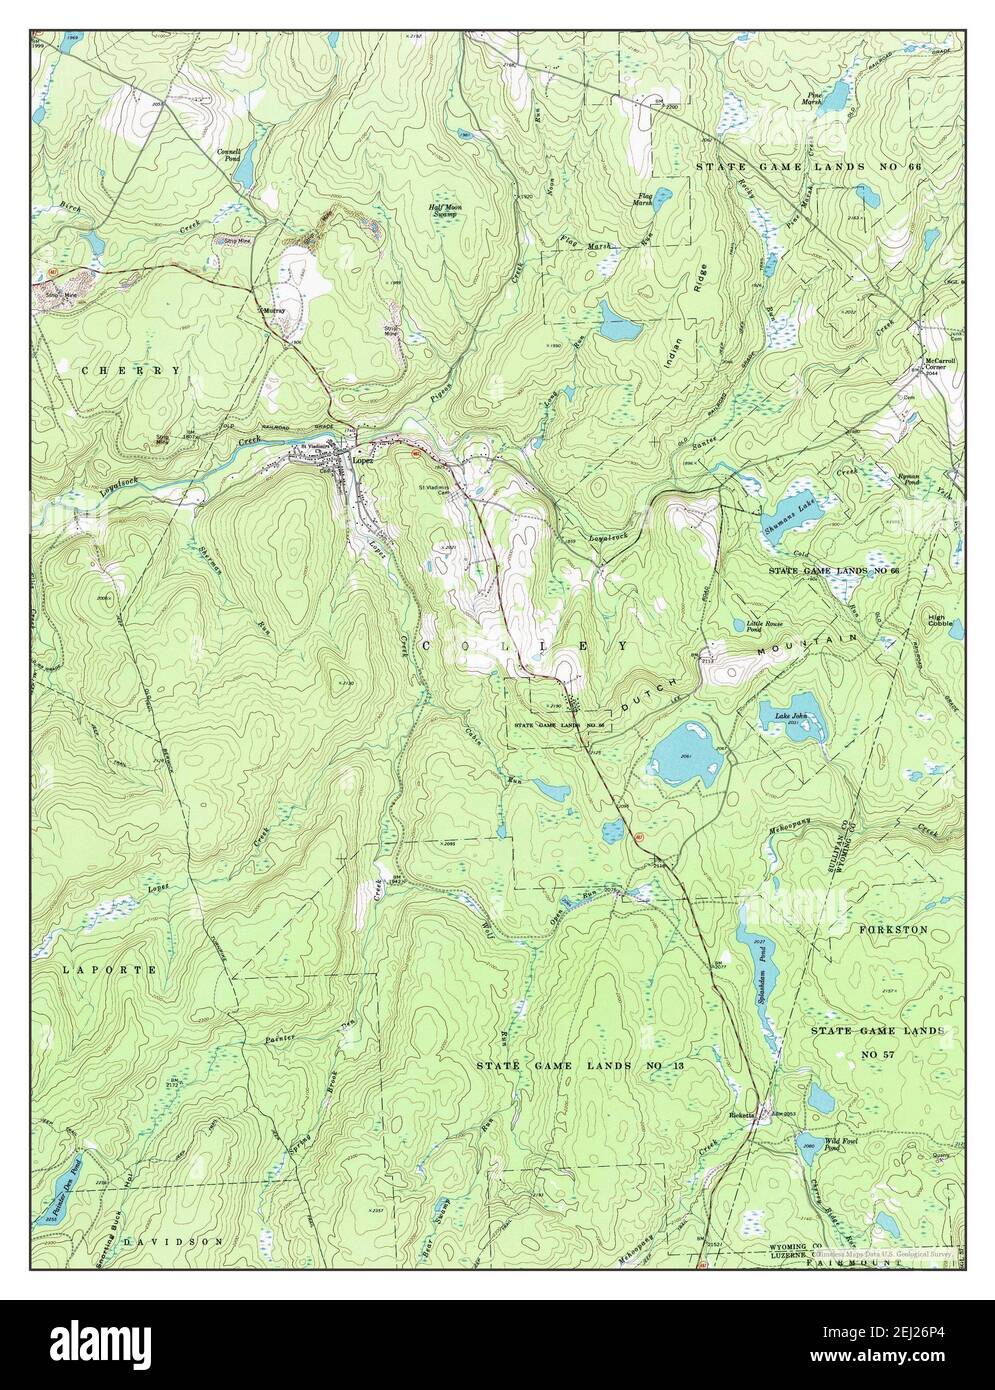 Lopez, Pennsylvania, map 1969, 1:24000, United States of America by Timeless Maps, data U.S. Geological Survey Stock Photo